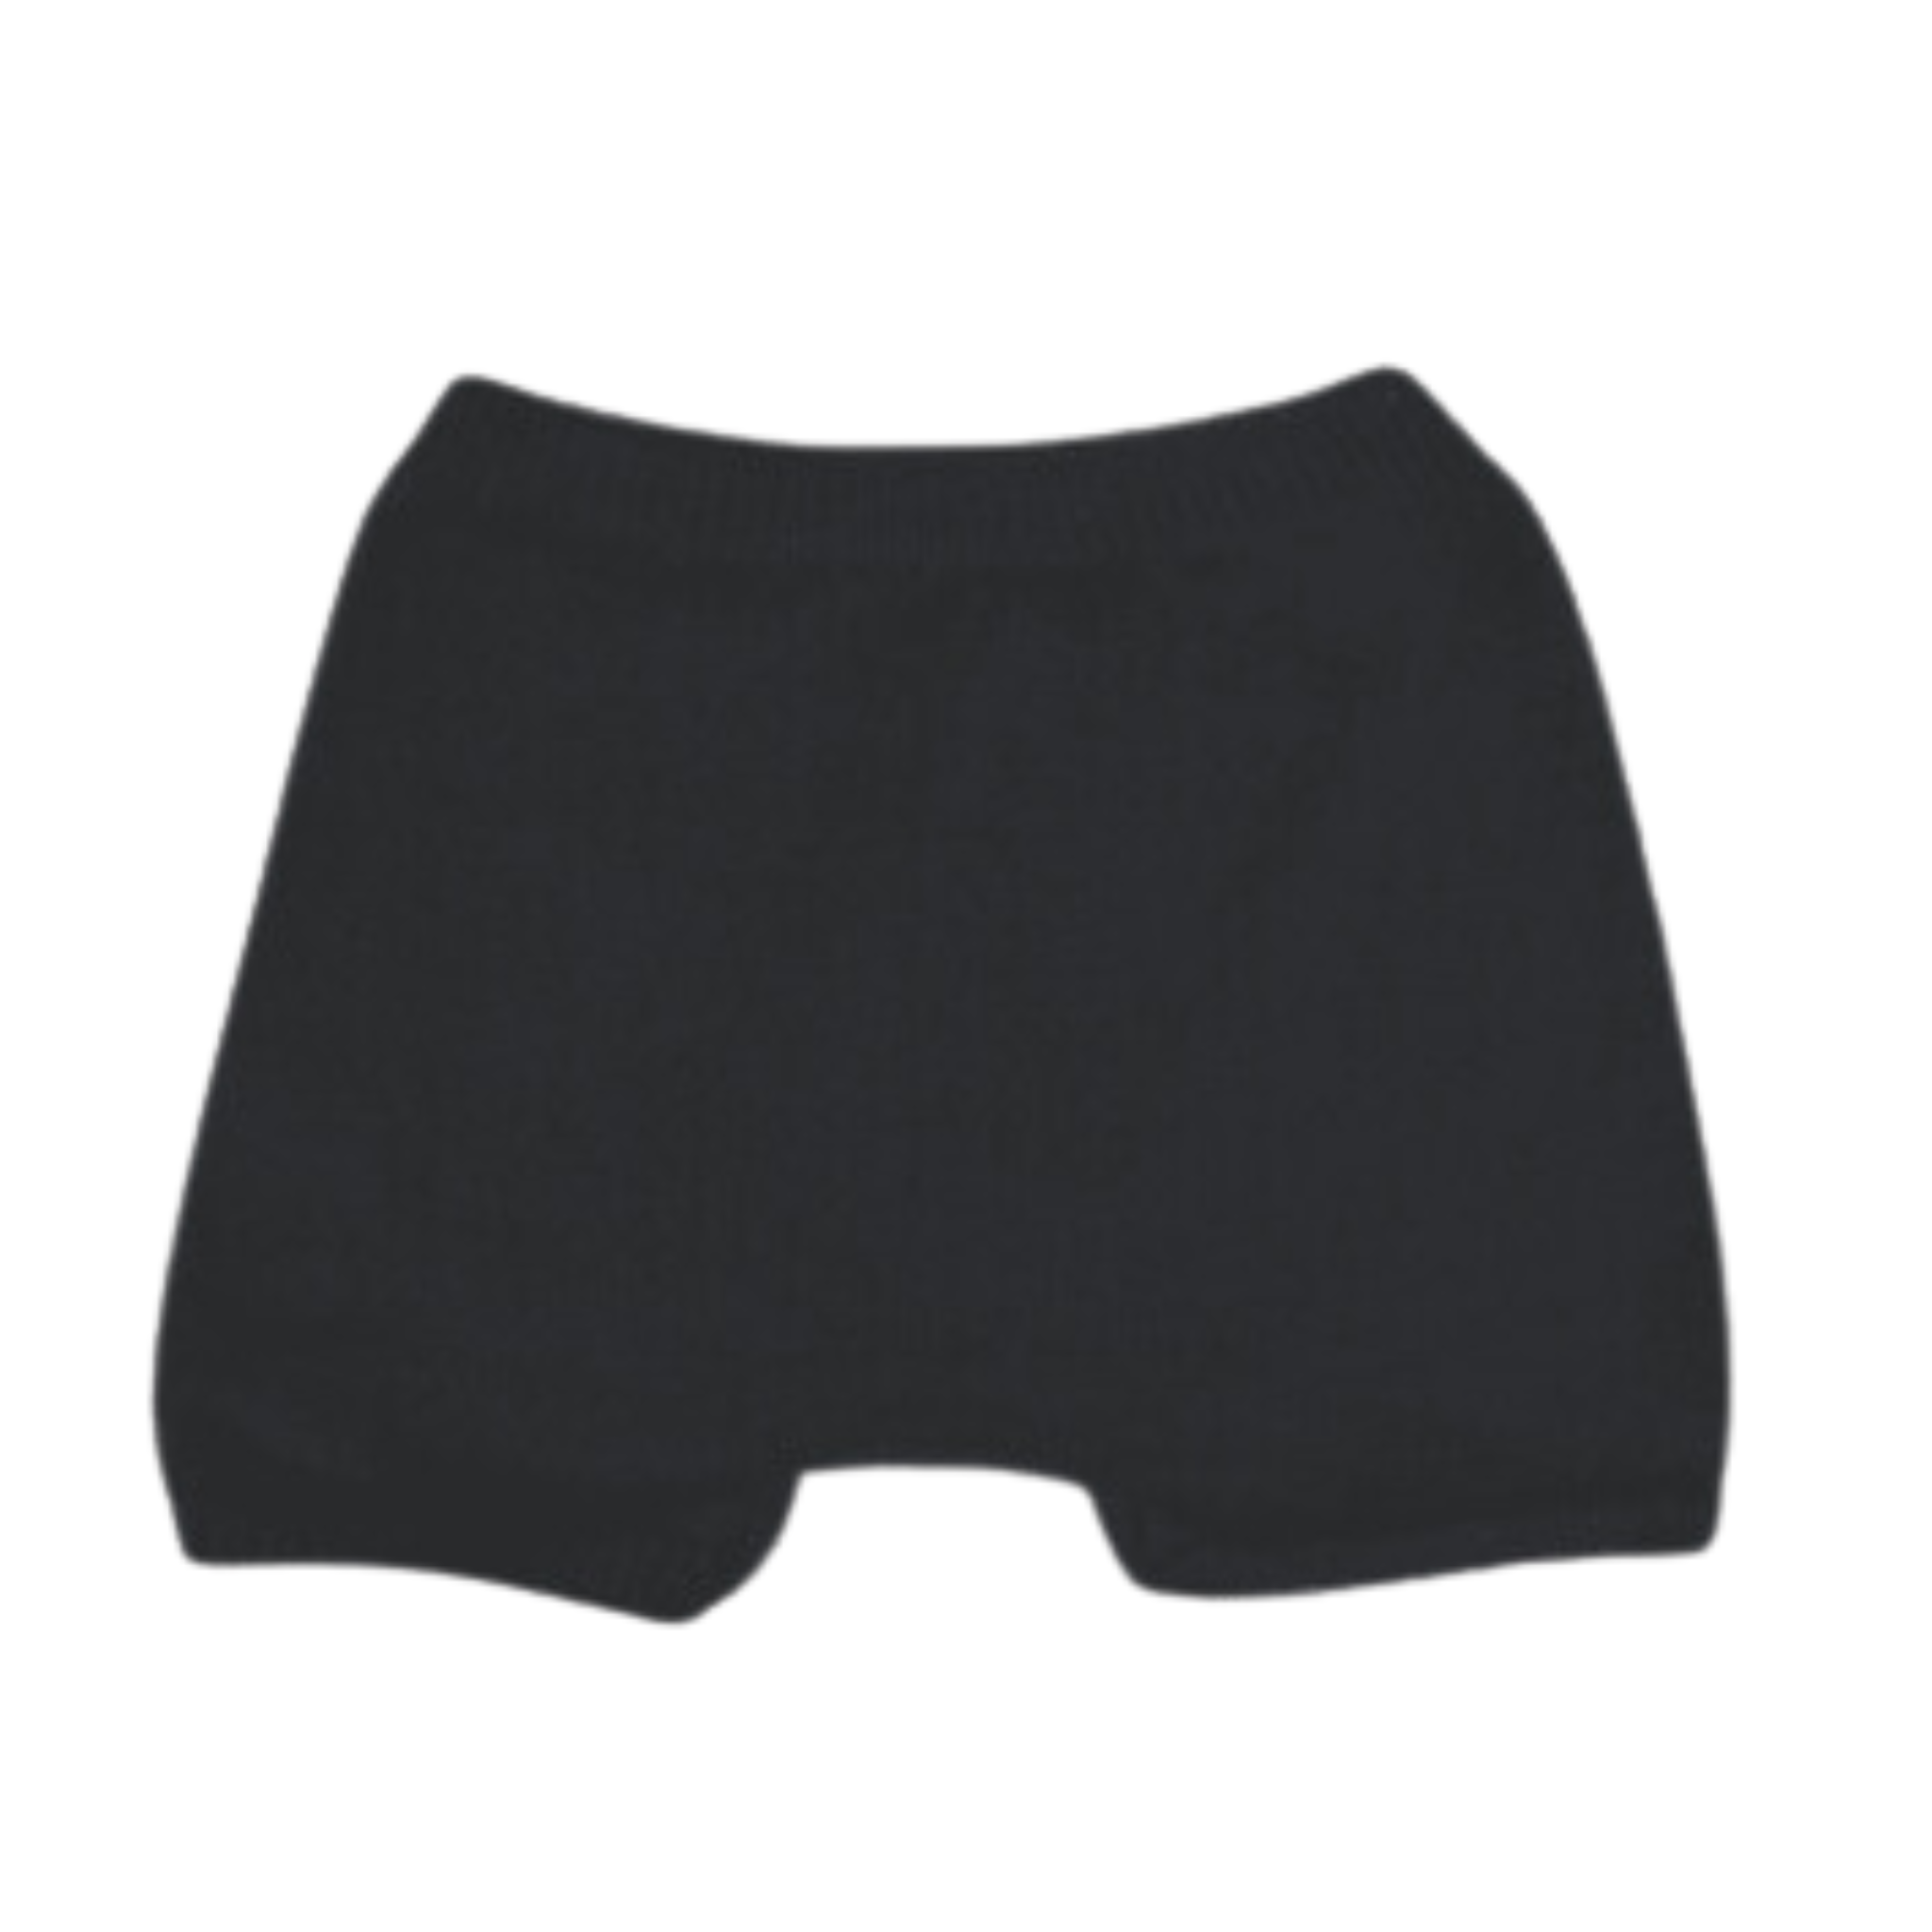 SmartKnitKIDS - Seamless Undies for Boys - Multipack - Black/Grey/White Boxer Briefs